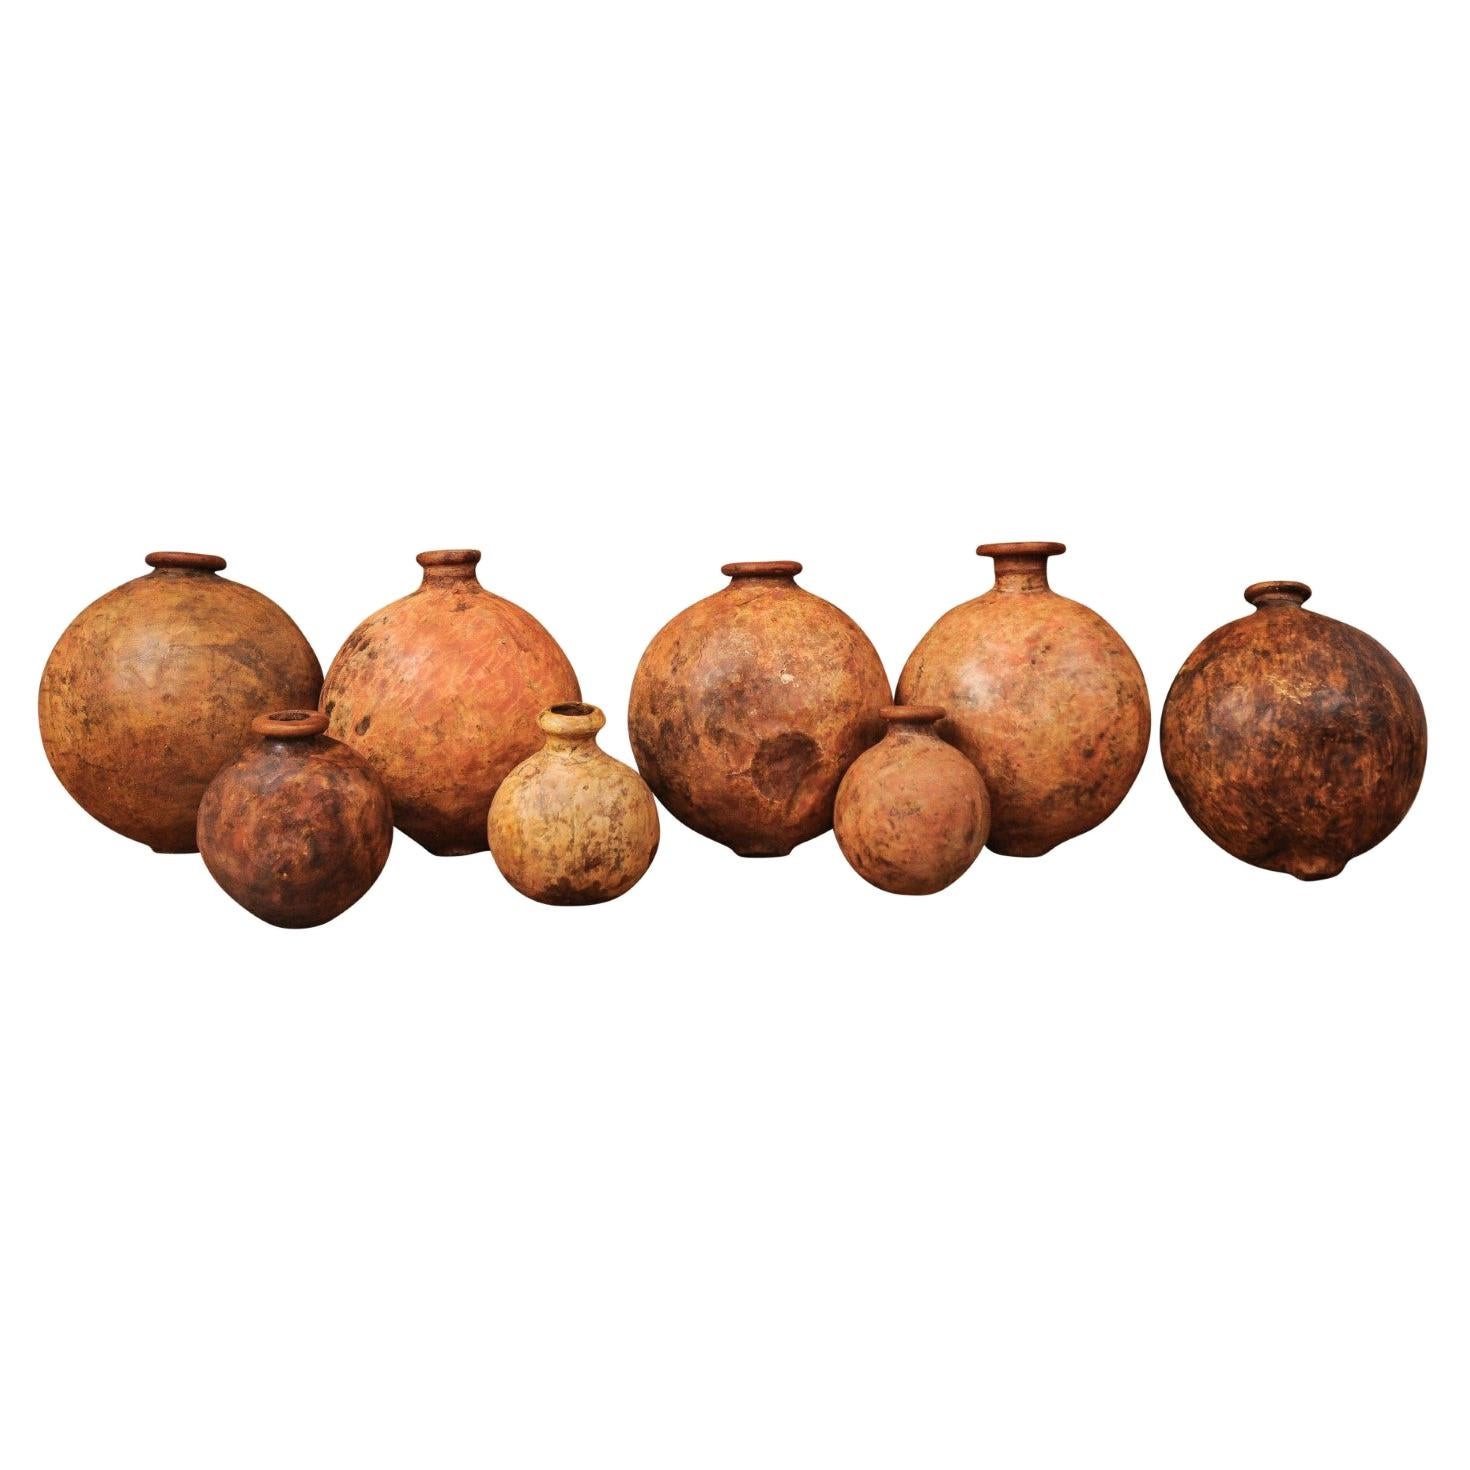 Spanish 1830s Rustic Wine or Olive Oil Jugs with Distressed Patina, Sold Each